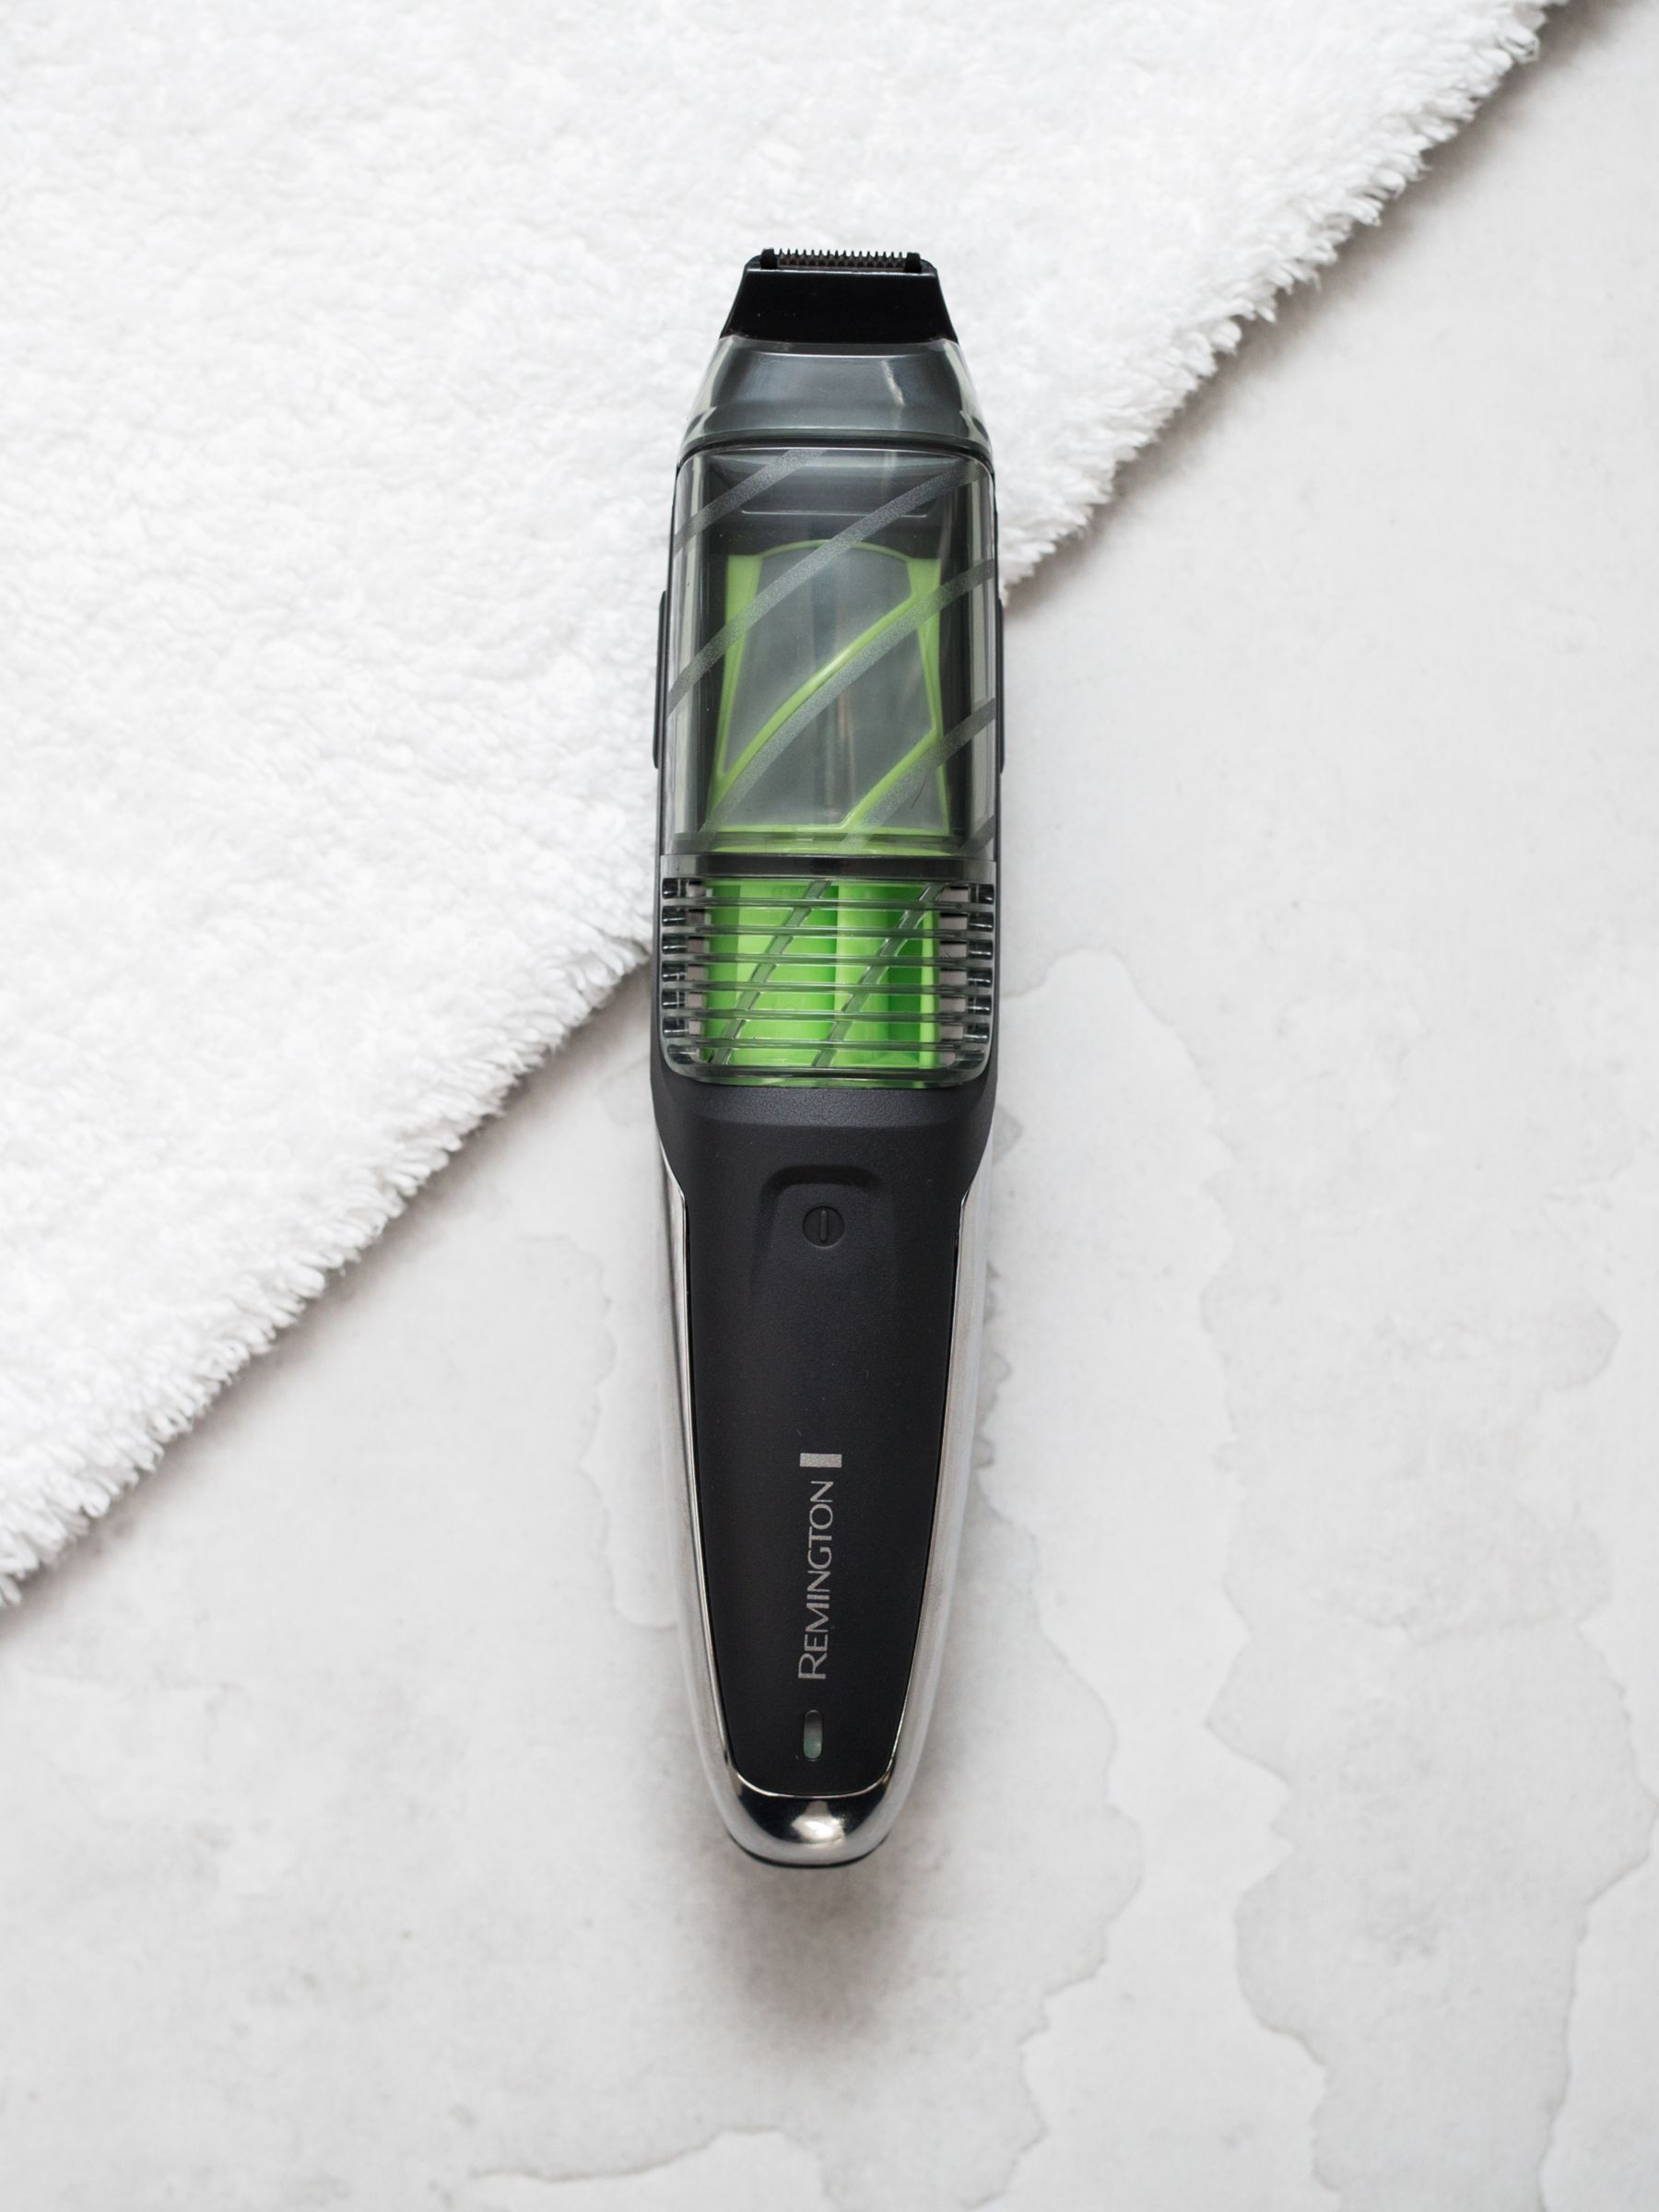 remington mb6850 stubble and beard trimmer